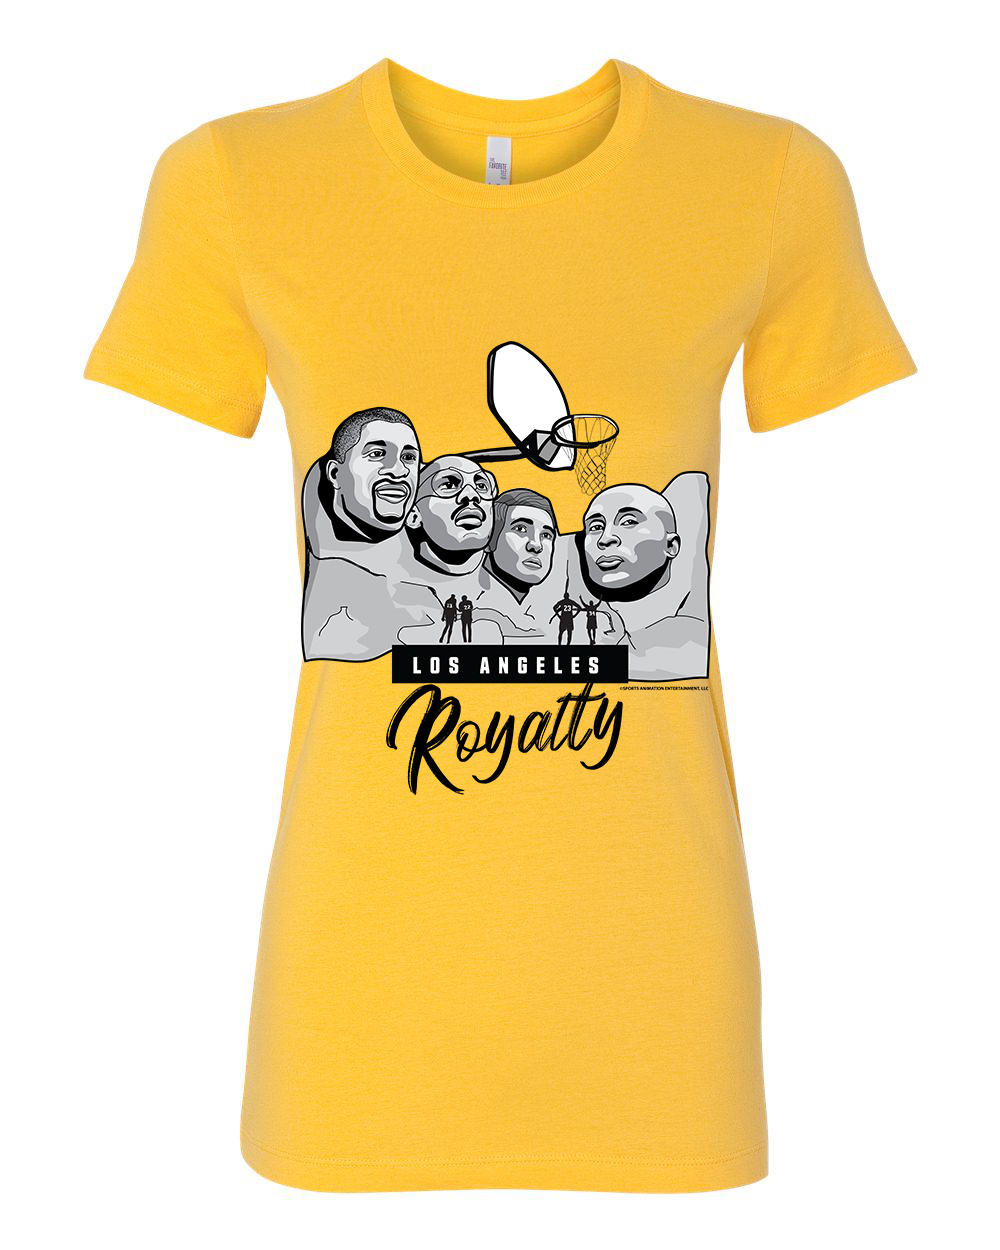 Mount Rushmore - Basketball Los Angeles Royalty (Gold Cotton) Women